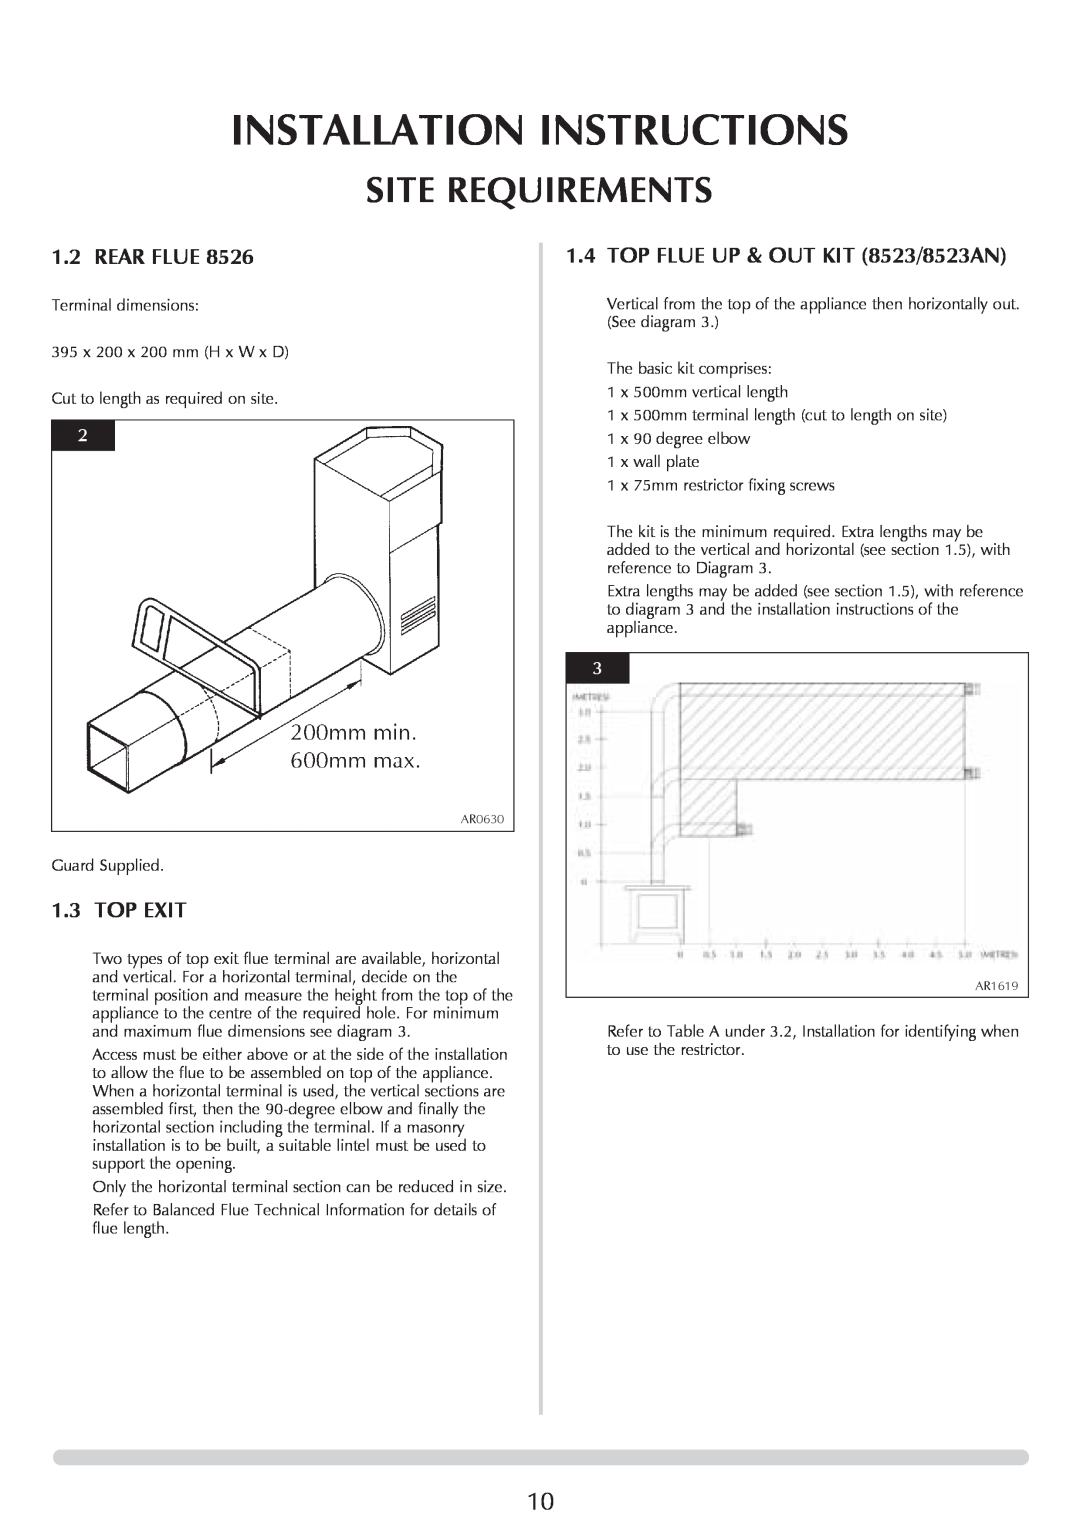 Stovax 8547LUC-P8547LUC manual Rear Flue, Top Exit, TOP FLUE UP & OUT KIT 8523/8523AN, Installation Instructions 